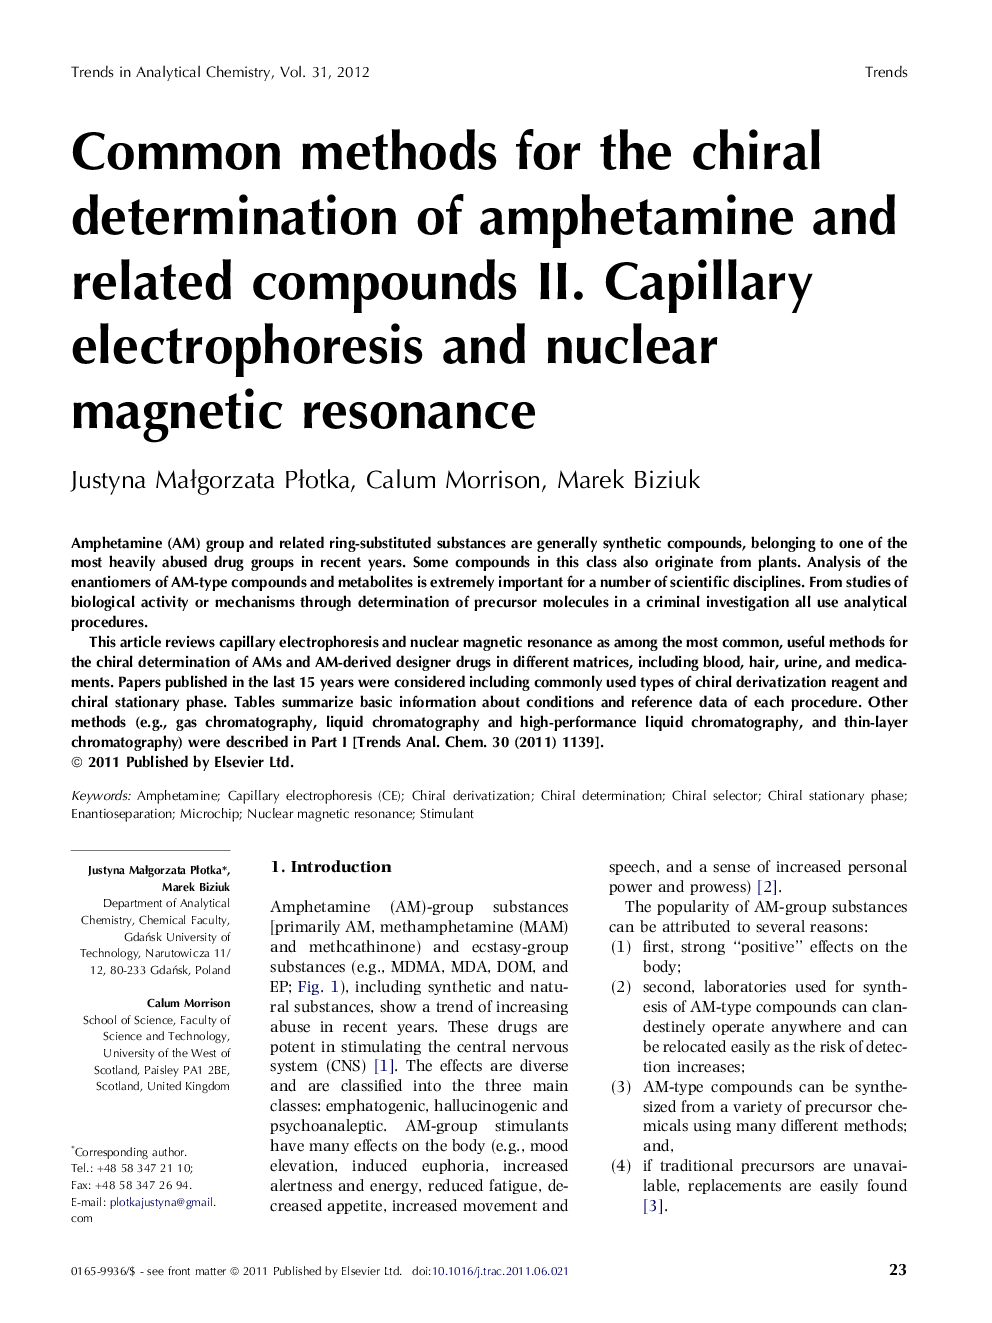 Common methods for the chiral determination of amphetamine and related compounds II. Capillary electrophoresis and nuclear magnetic resonance